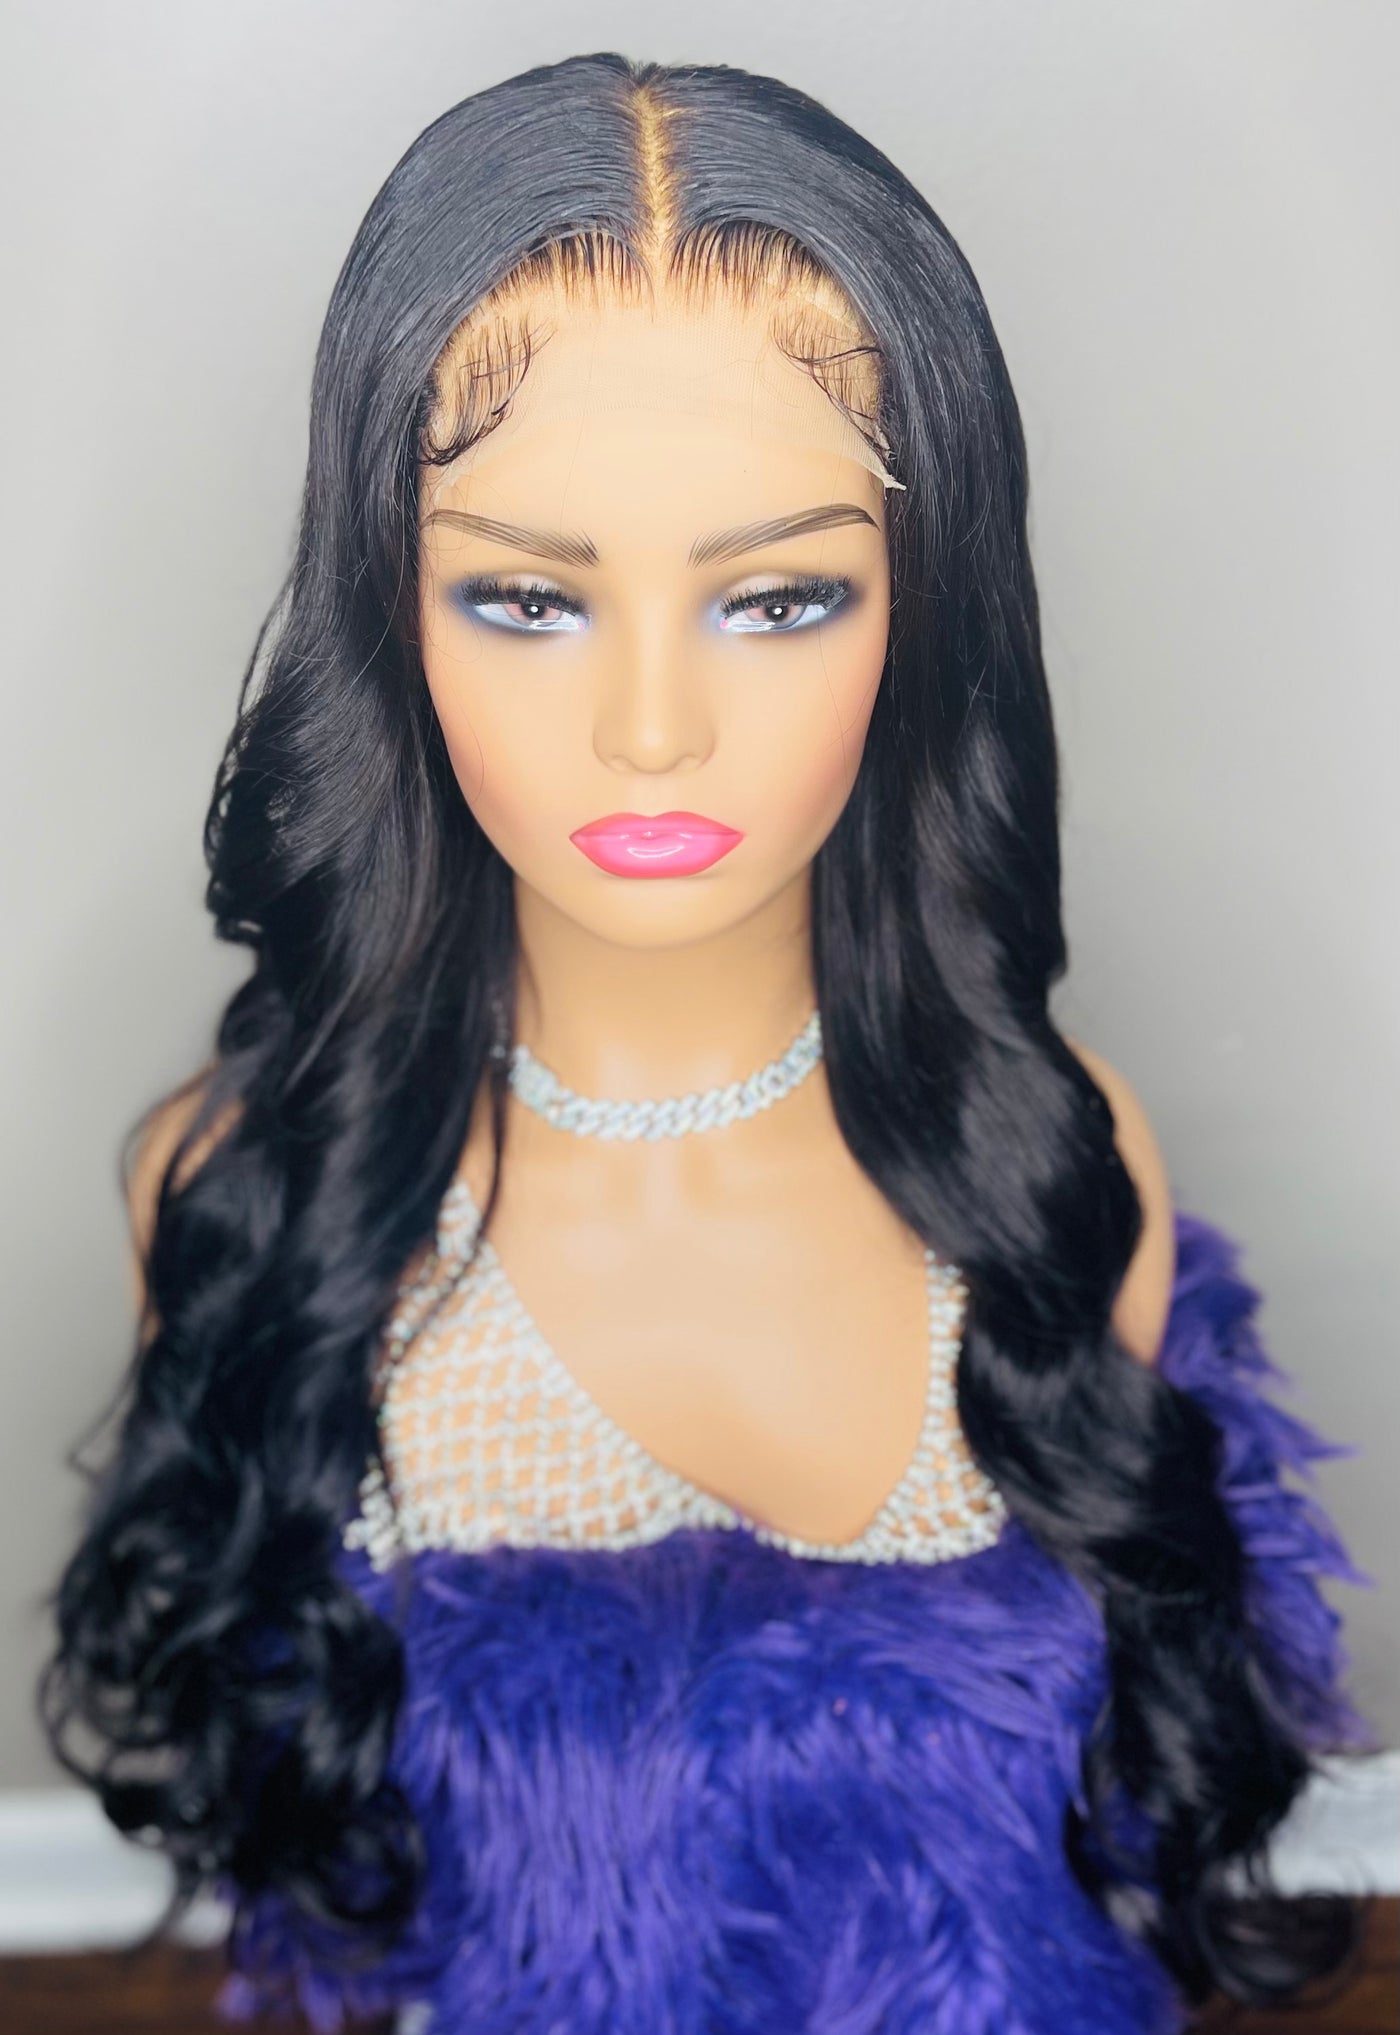 Achieve an Effortless Look with our Virgin Brazilian Lace Closure Wig